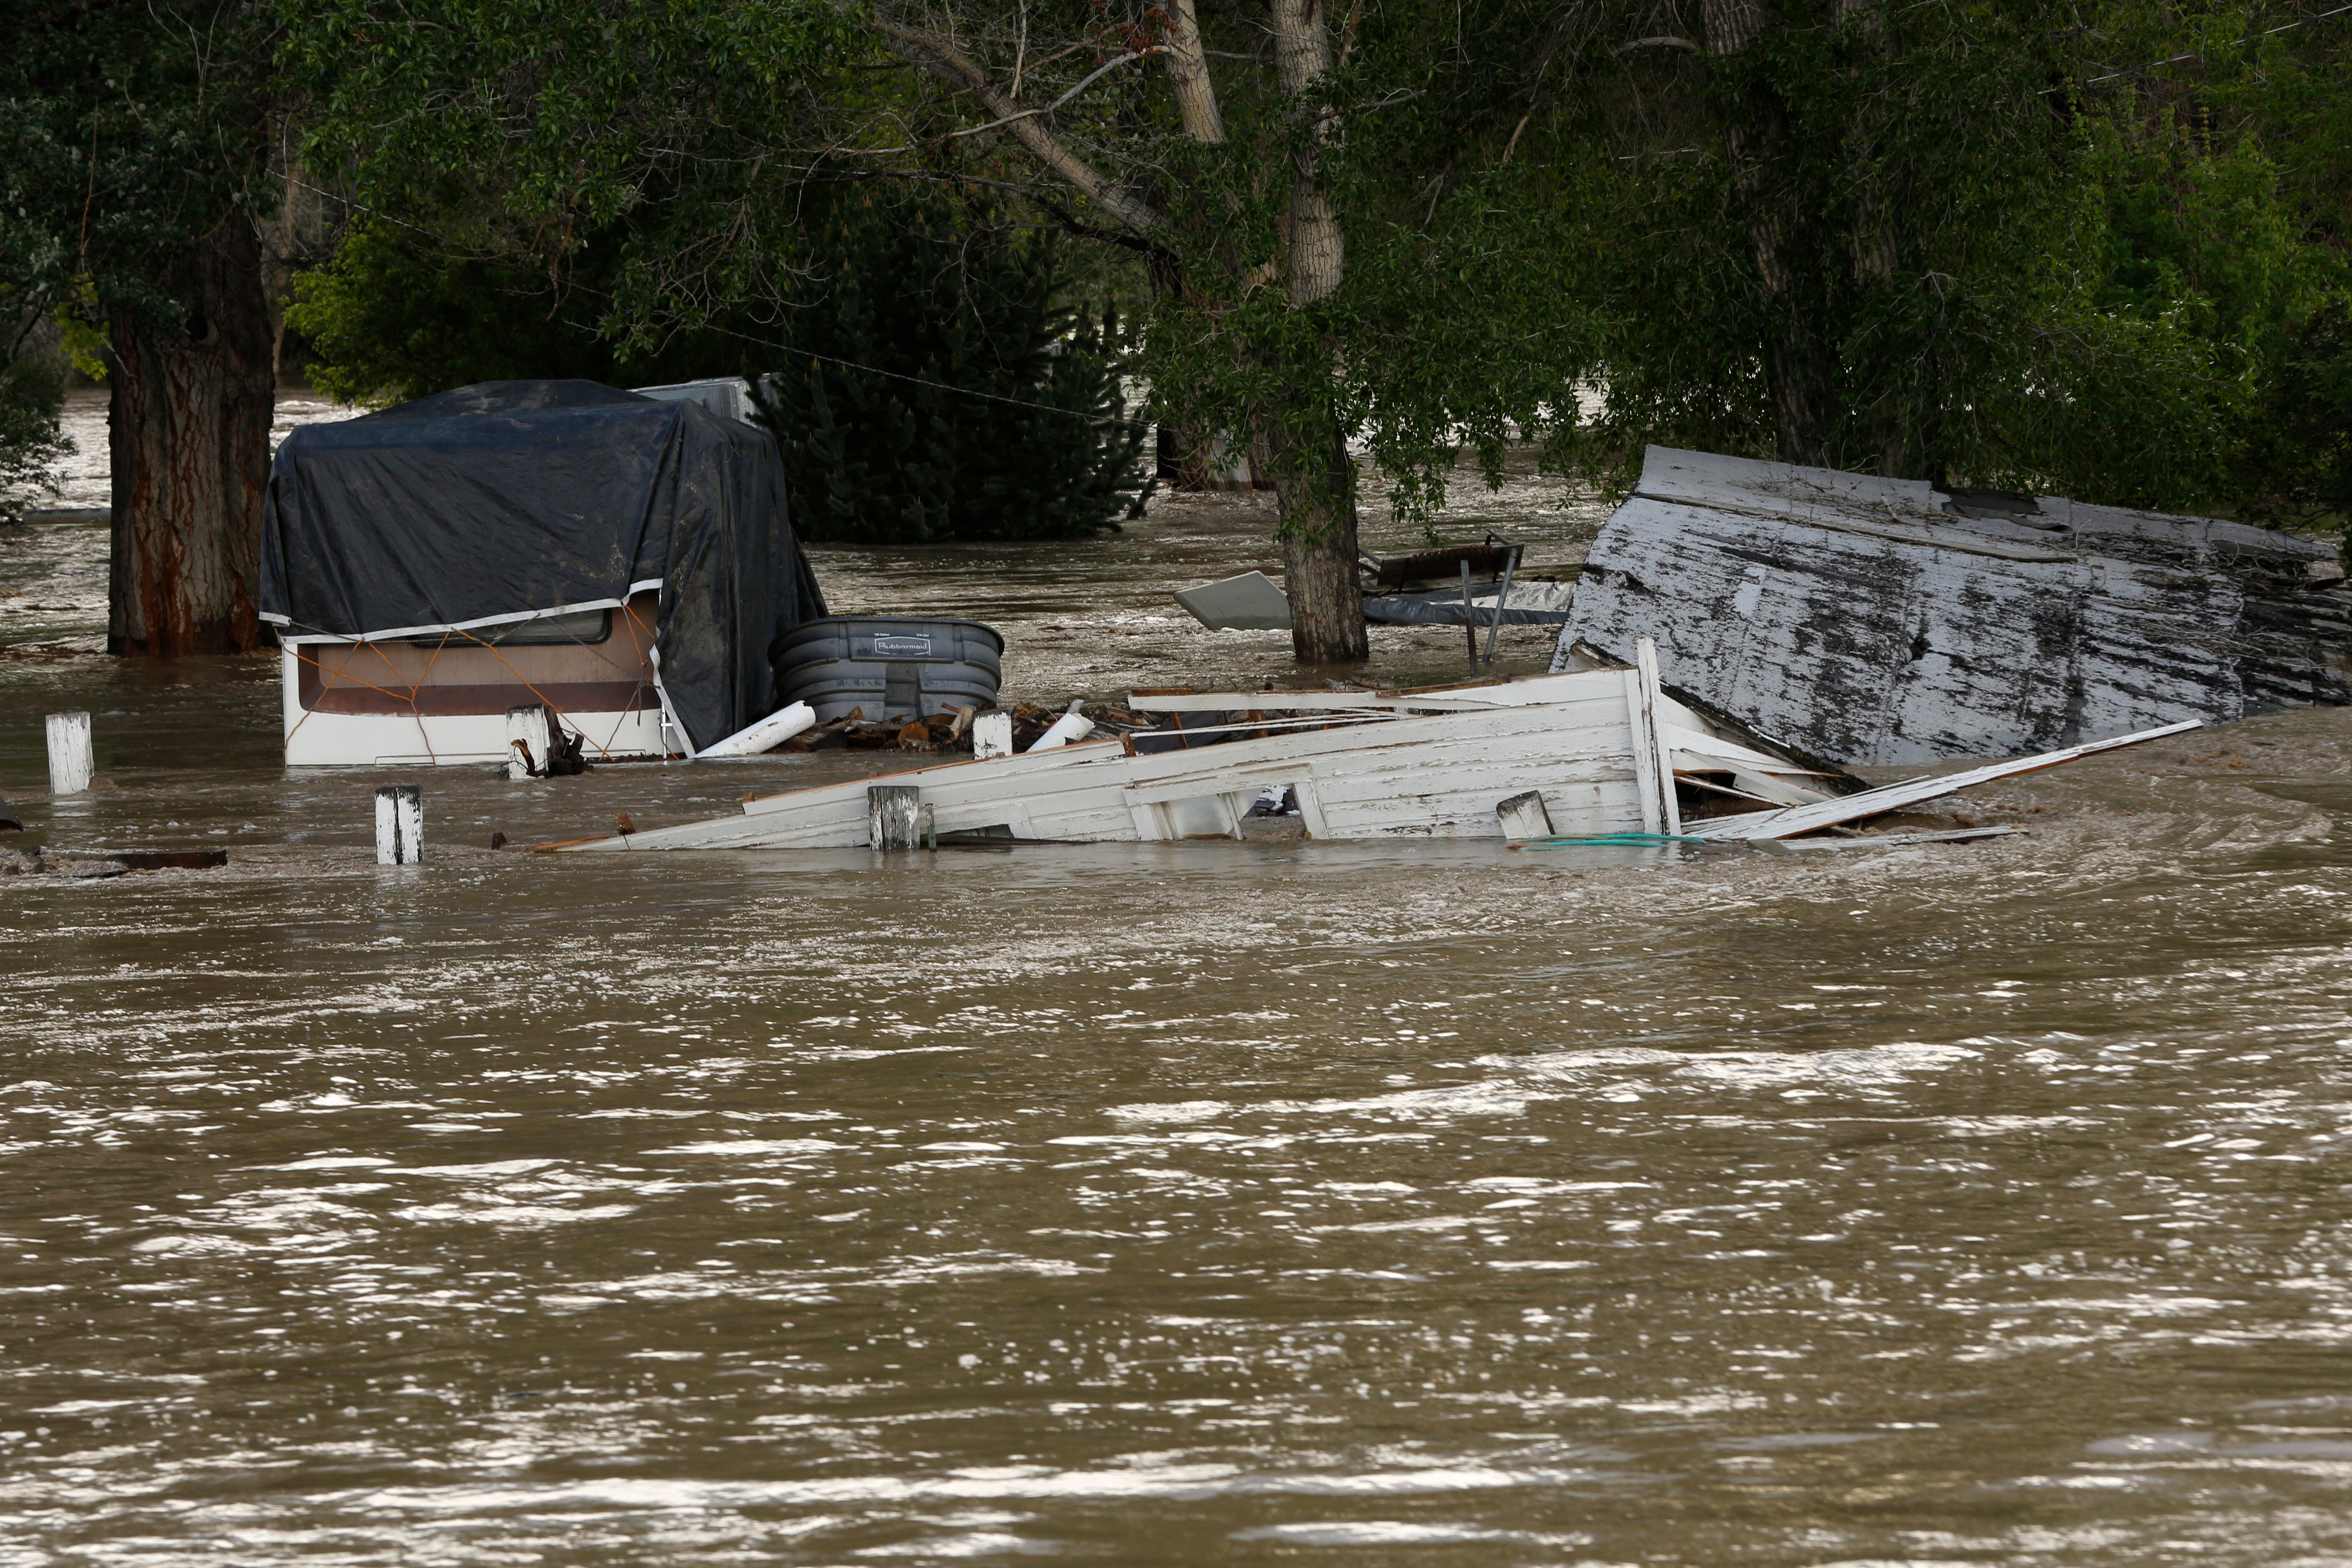 Floodwaters inundated property along the Clarks Fork Yellowstone River near Bridger, Mont, on Monday, June 13, 2022 (Photo: Emma H. Tobin, AP)